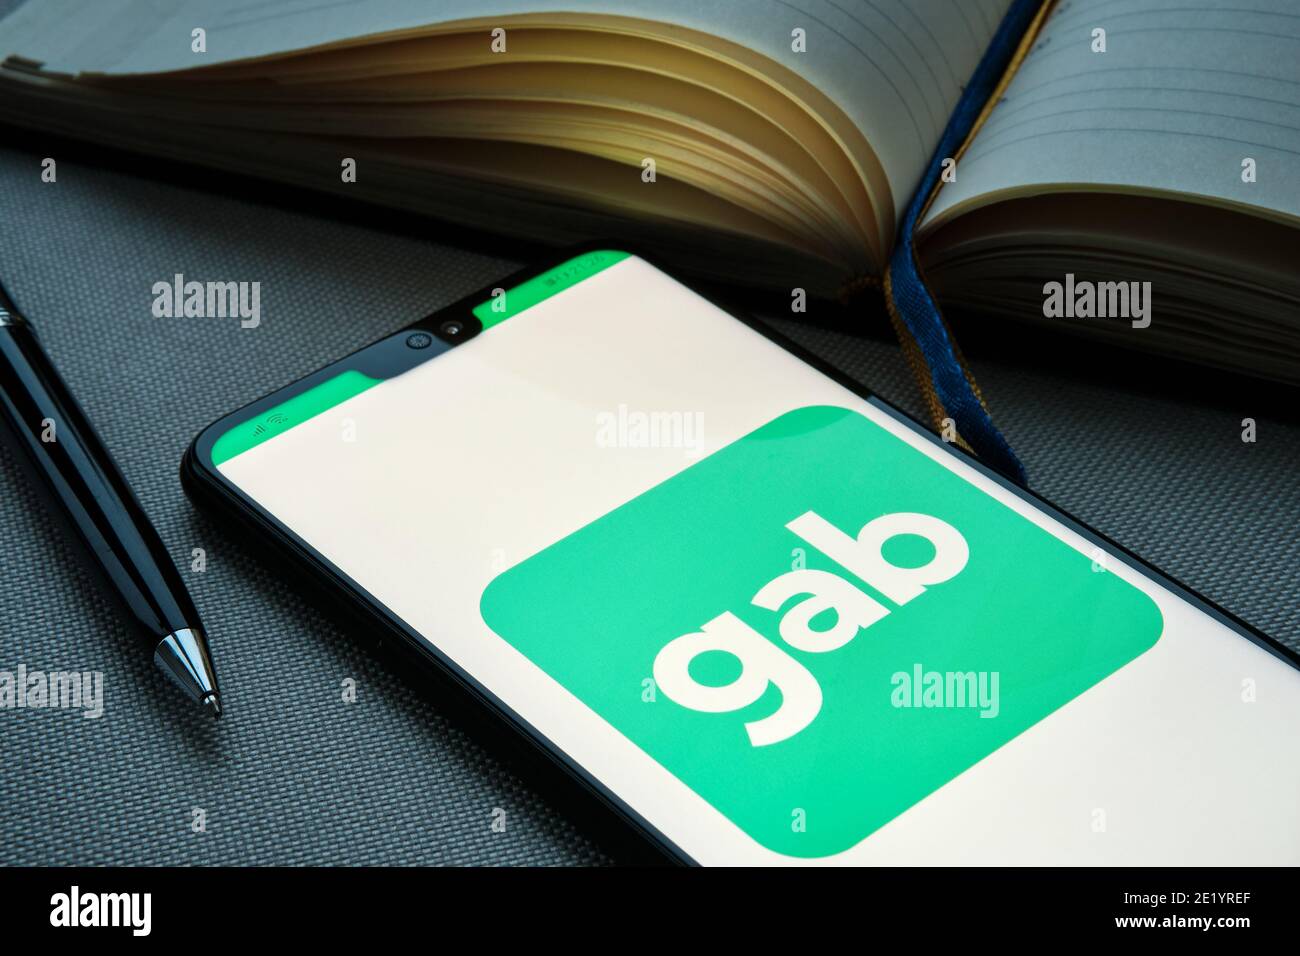 Stafford, United Kingdom - January 10 2021: GAB social media seen on the smarthpne placed near diary and pen. Gab app is a micro-blogging social netwo Stock Photo